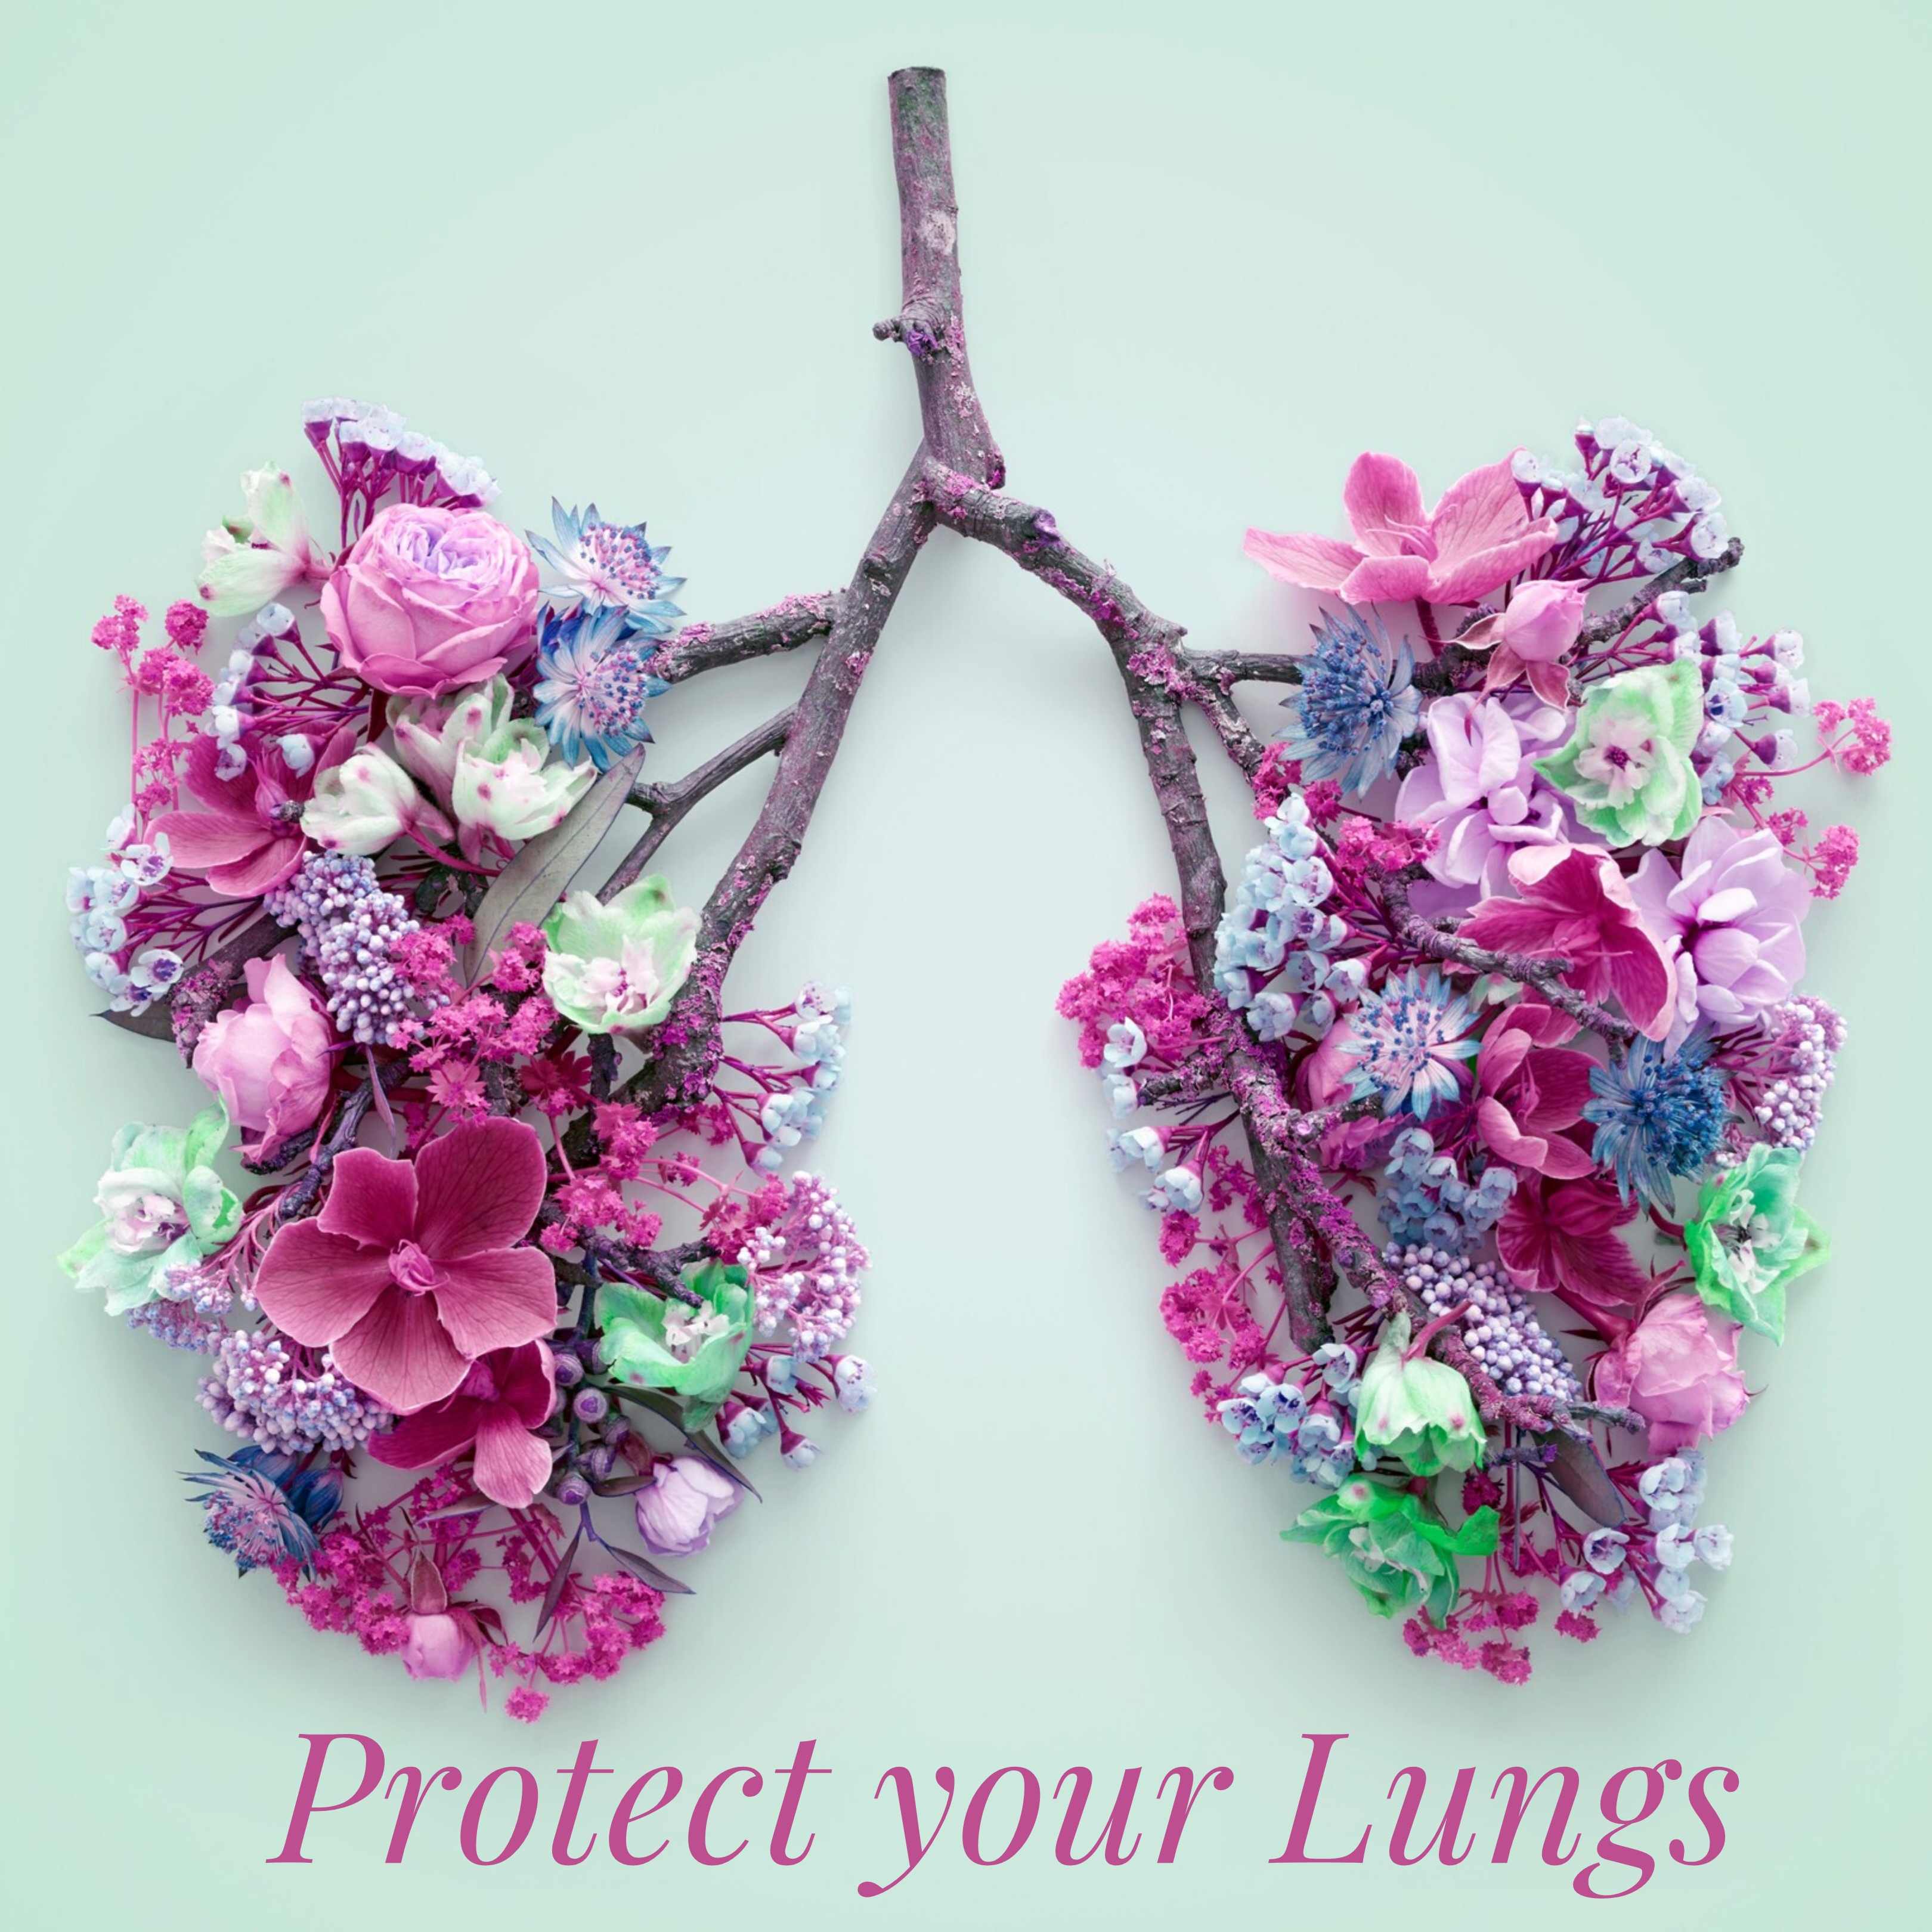 Protect Your Lungs